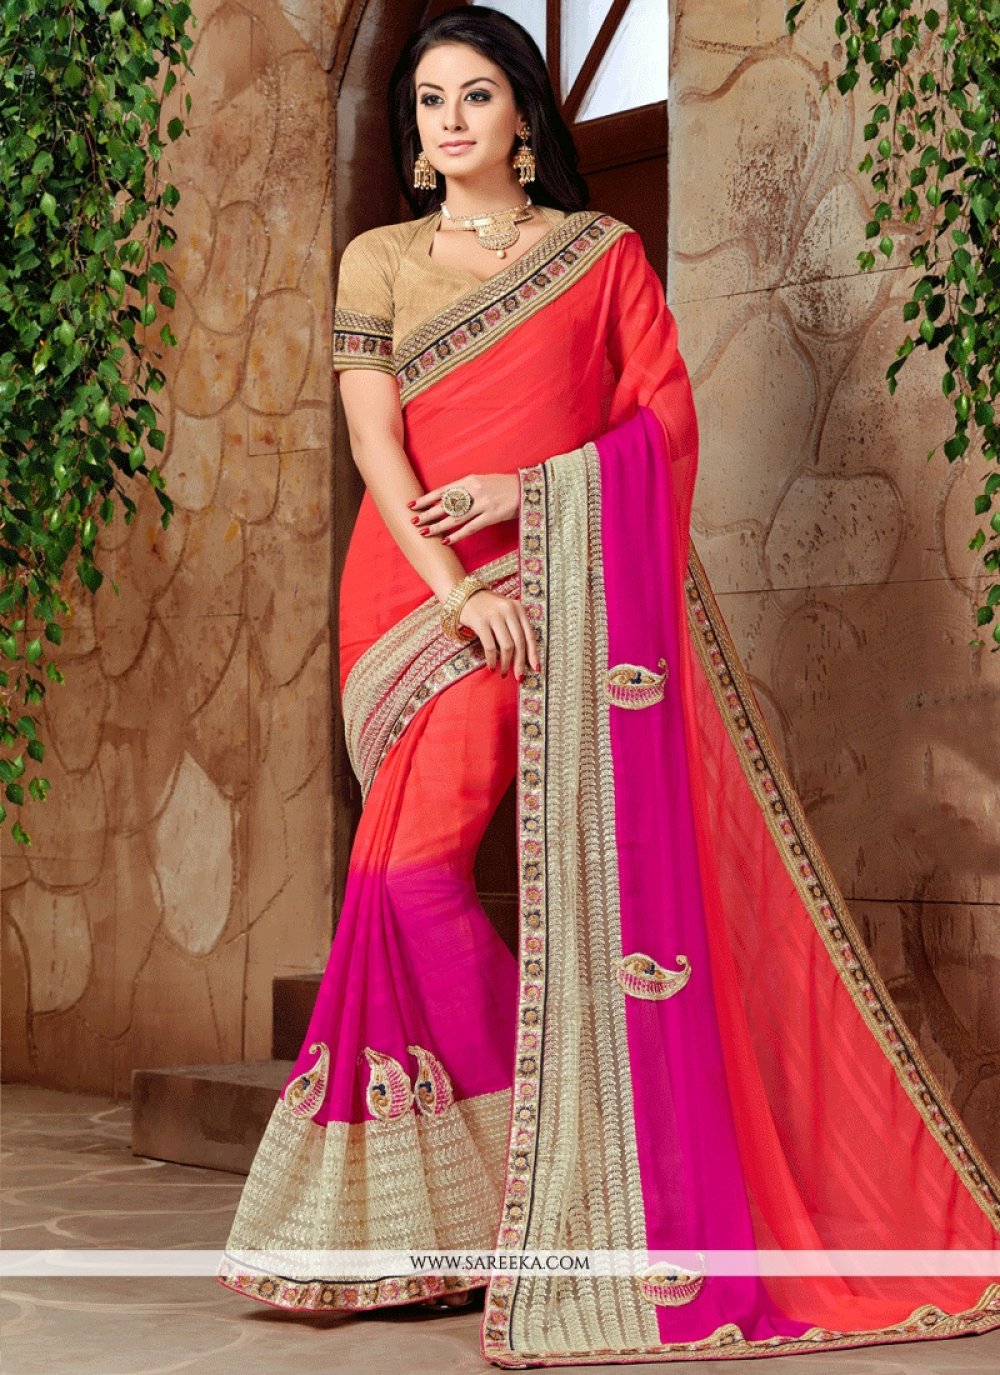 Buy Faux Georgette Hot Pink and Orange Shaded Saree Online : France